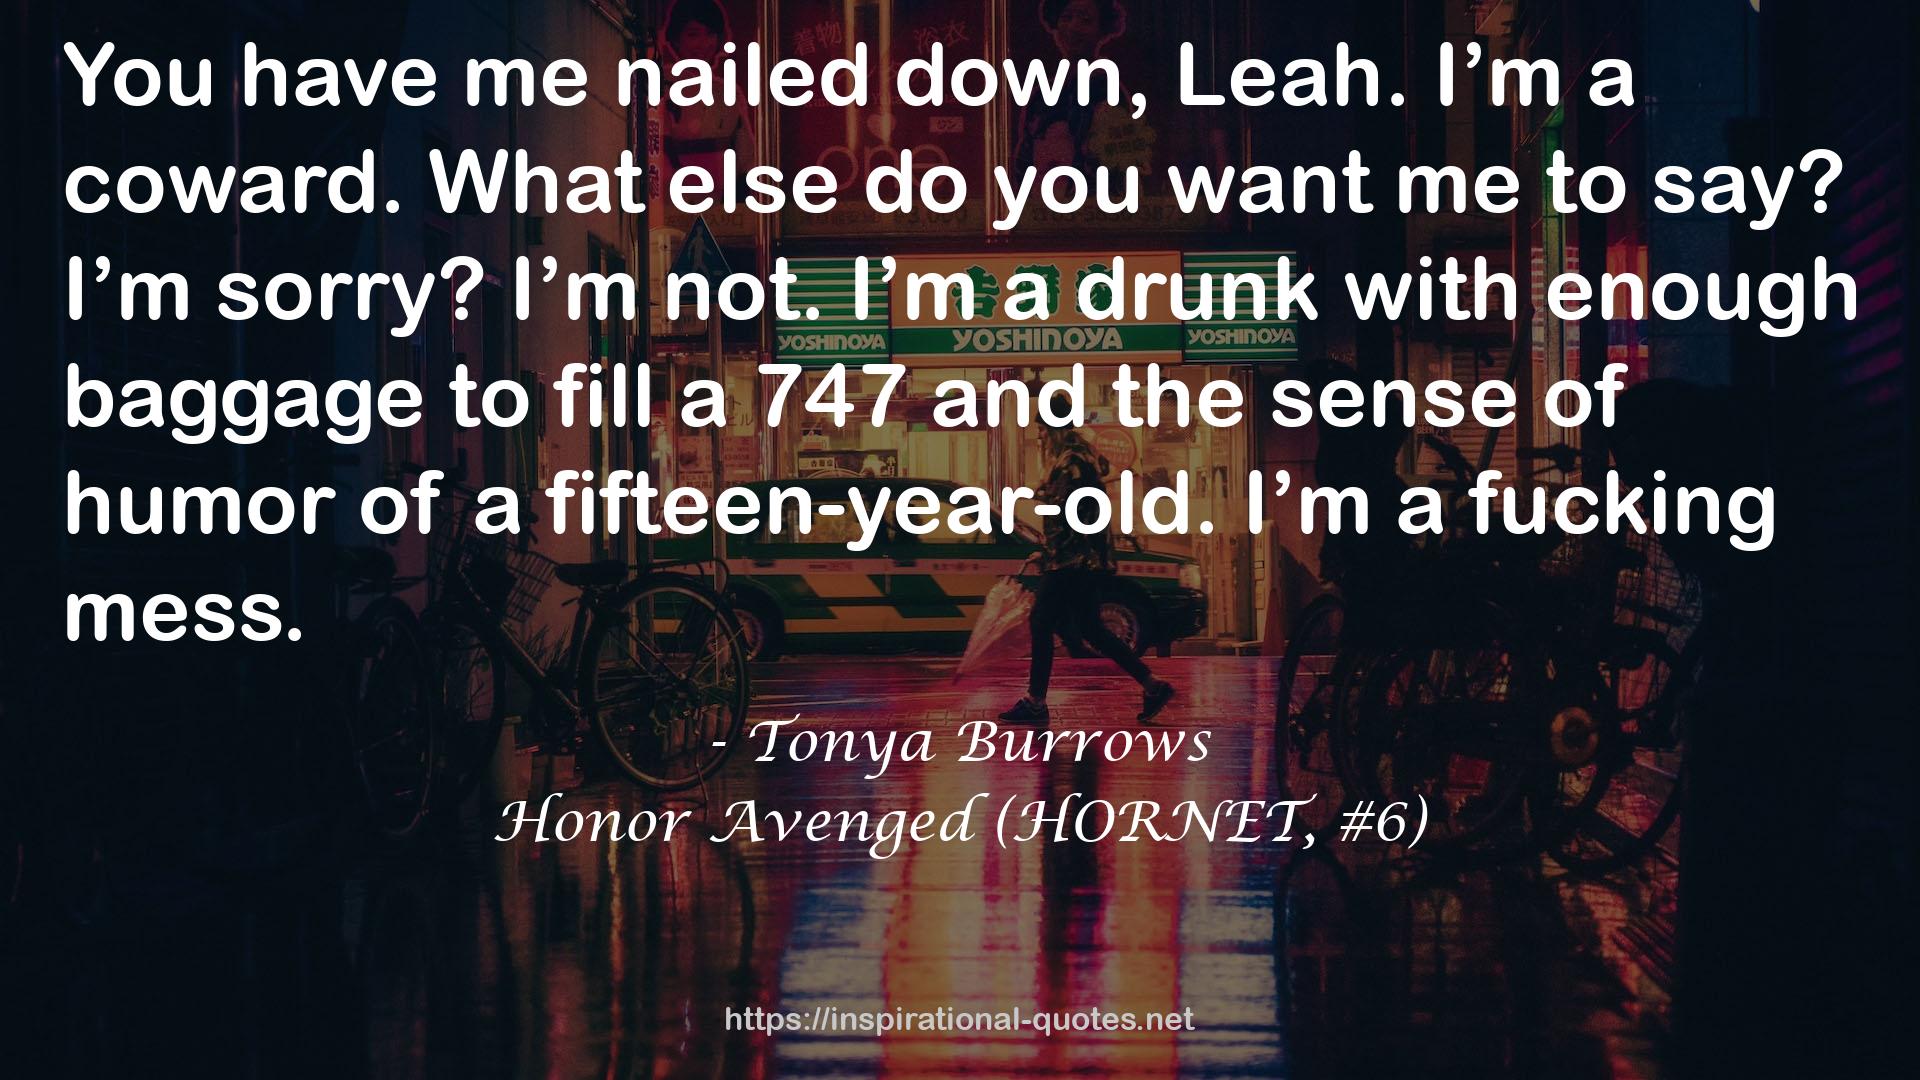 Honor Avenged (HORNET, #6) QUOTES